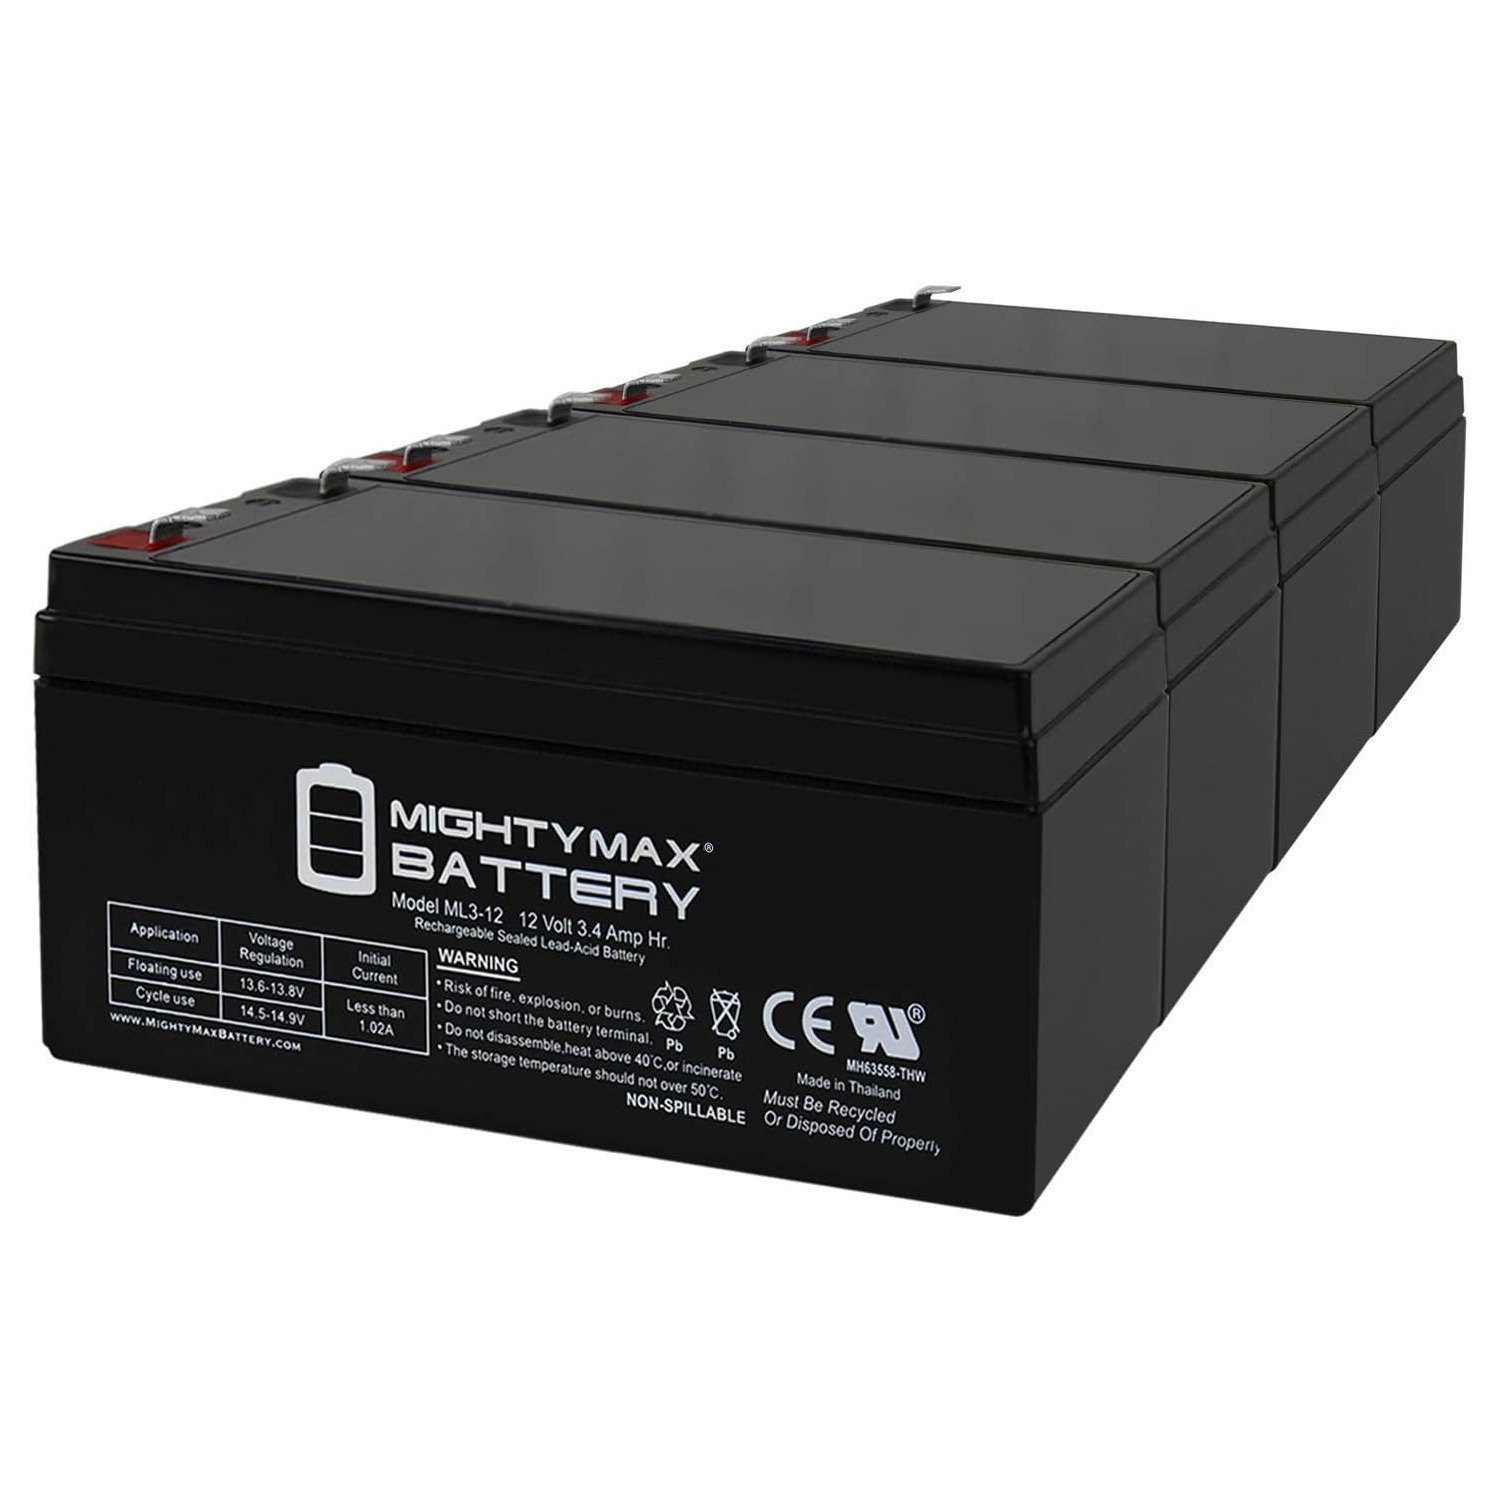 ML3-12 - 12V 3AH Replacement Battery for Yuasa NP3.4-12, NP 3.4-12 Btty - 4 Pack